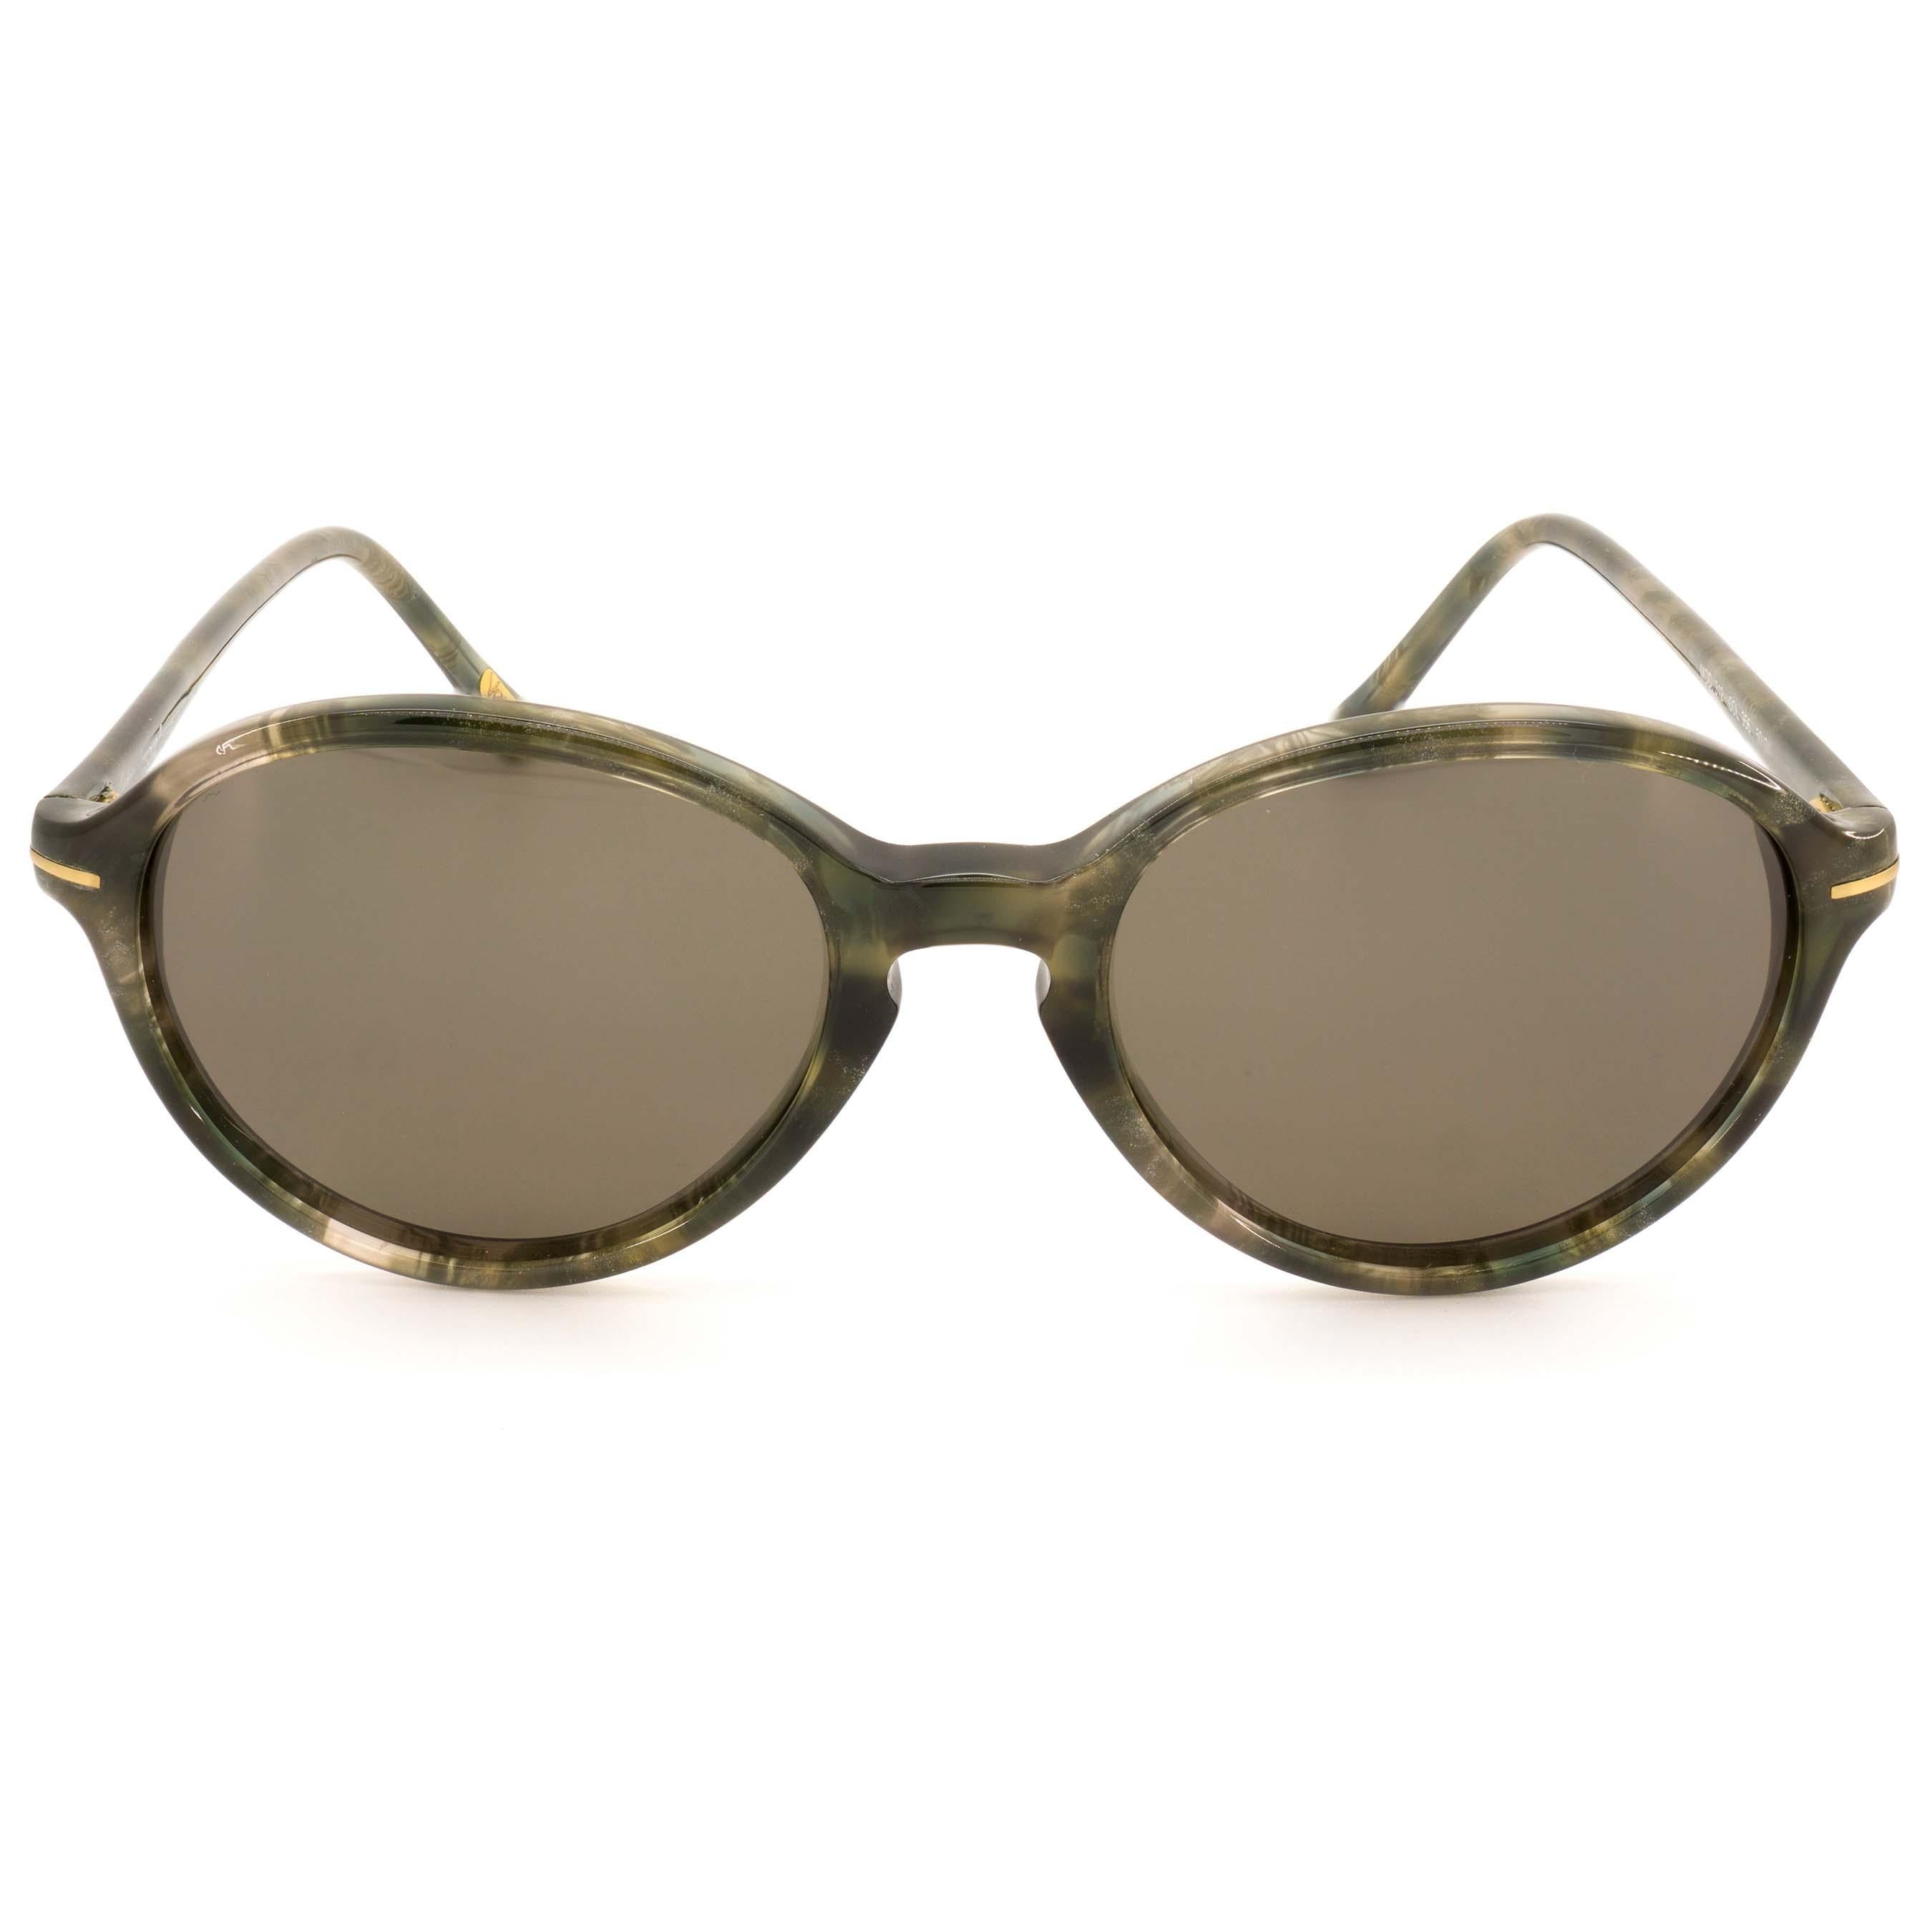 MAKE: Gianni Versace
MODEL: 312 - Olive
MADE IN: Italy
ERA: 1970s
CONDITION: New Old Stock [never worn]

DIMENSIONS:
SMALL
Lens width: 50 mm  /  1 15/16 in
Lens height: 44 mm  /  1 3/4 in
Bridge: 20 mm  /  13/16 in
Temple-to-temple width: 130 mm  / 